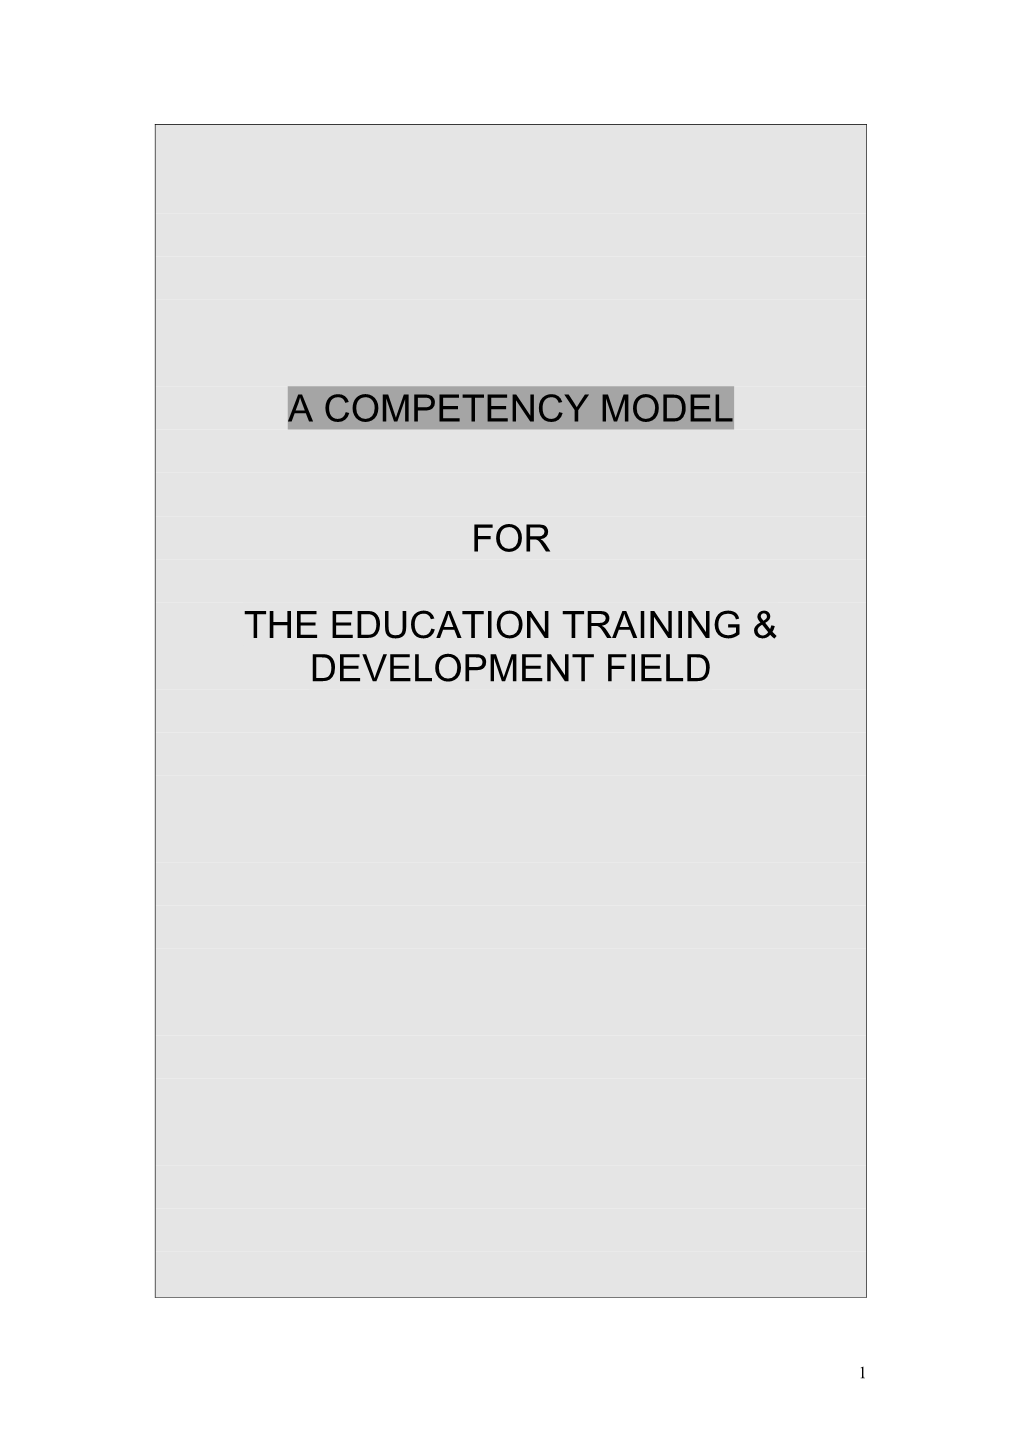 The Competency Model